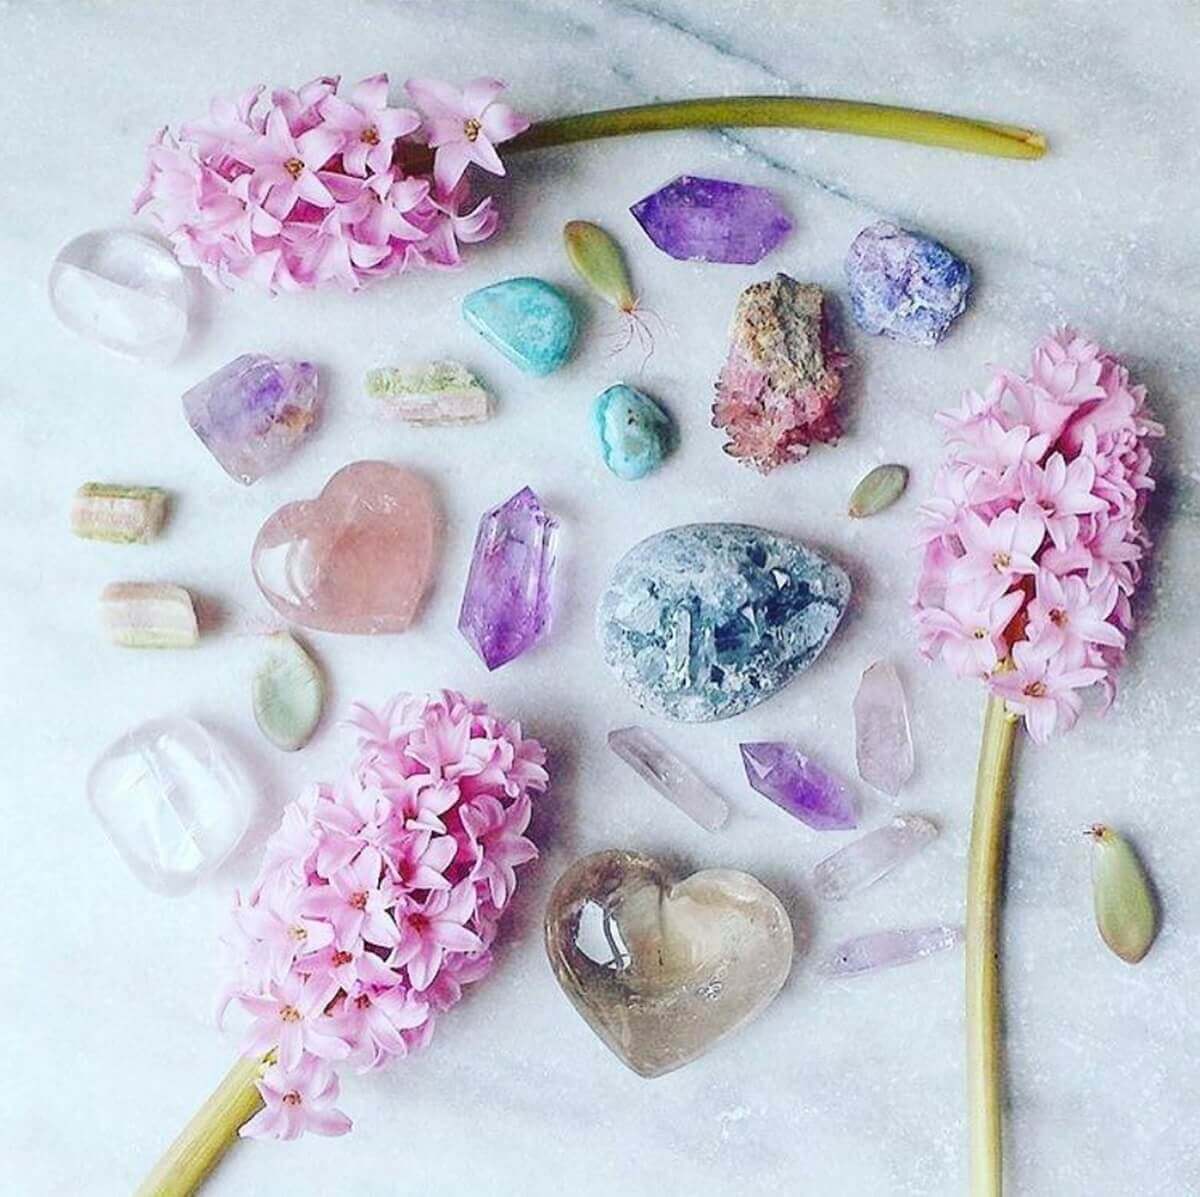 Aesthetic Crystals